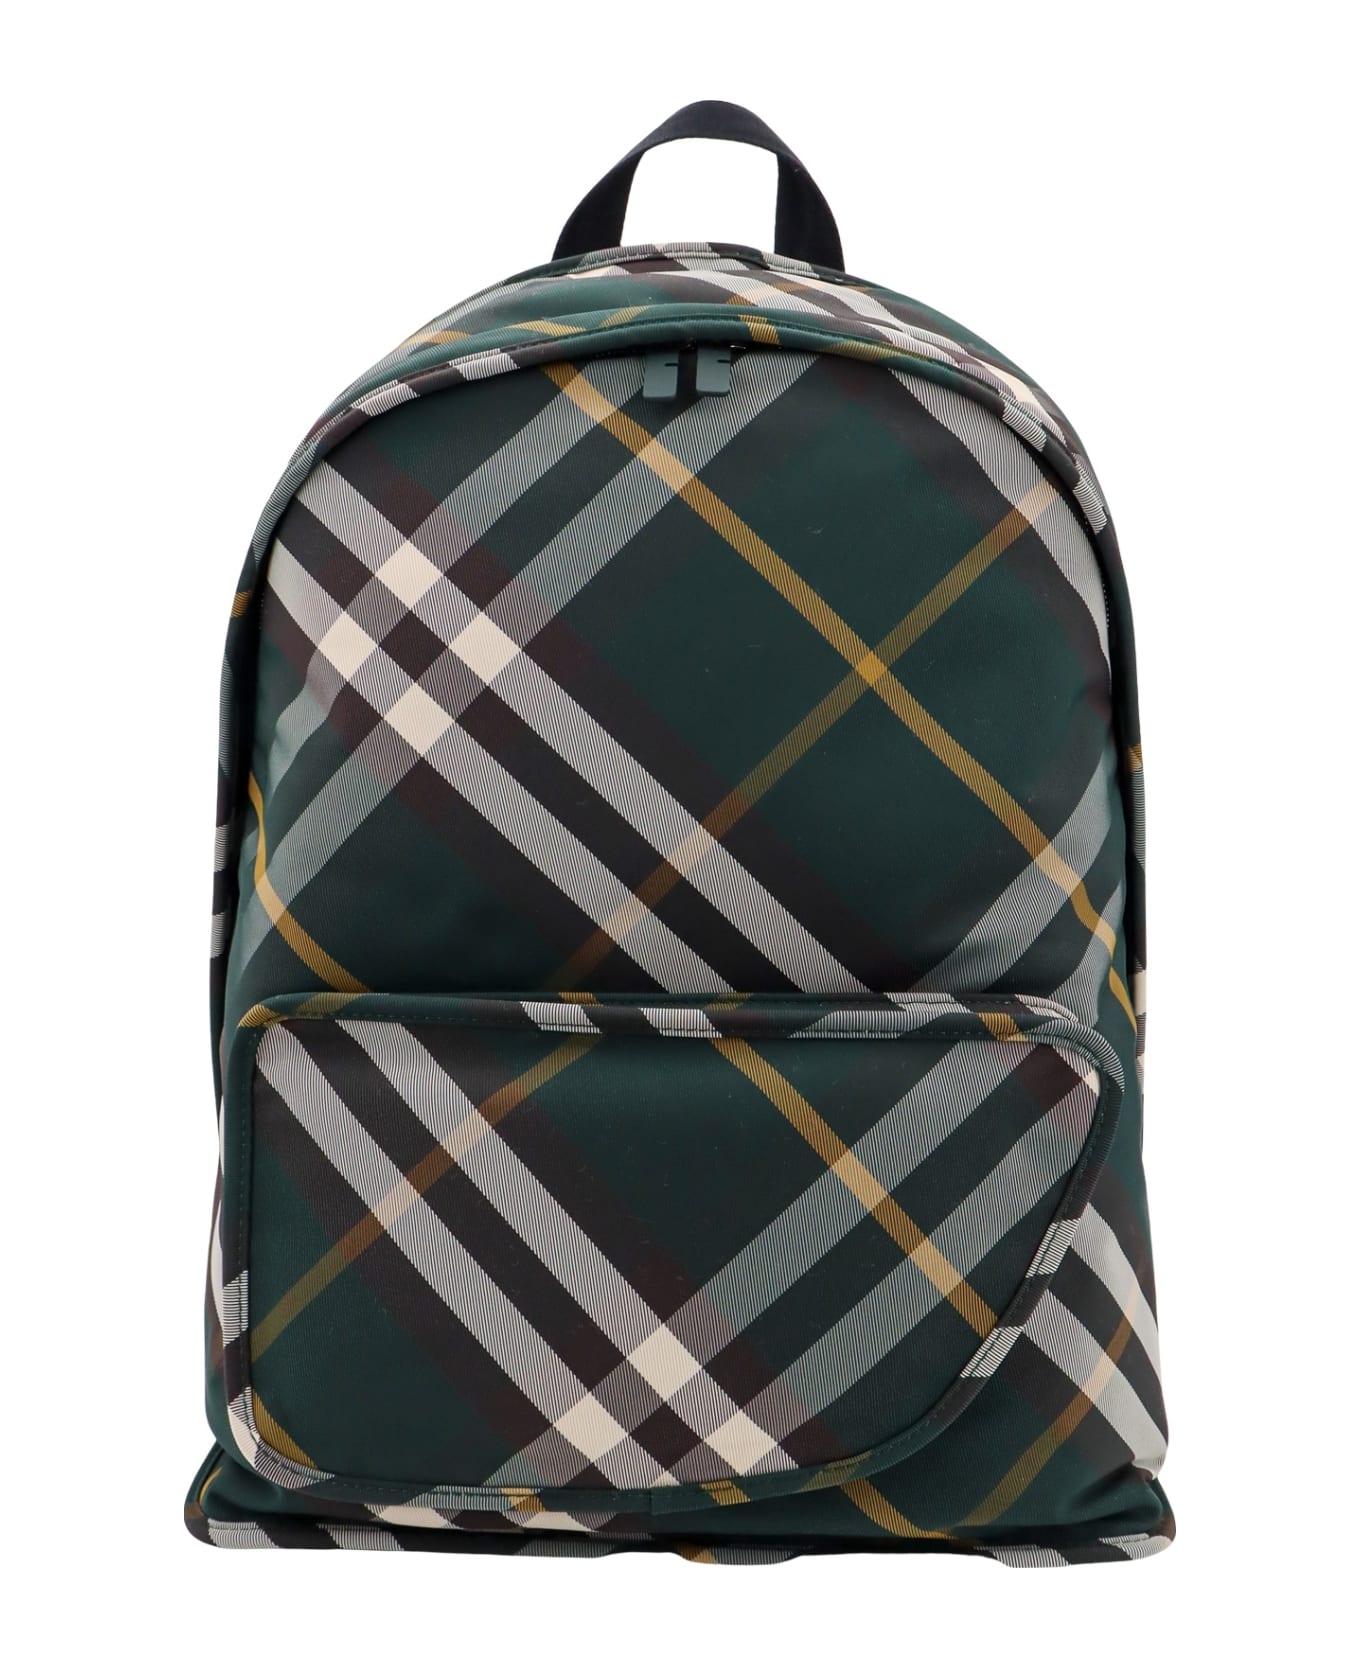 Burberry Backpack - Ivy